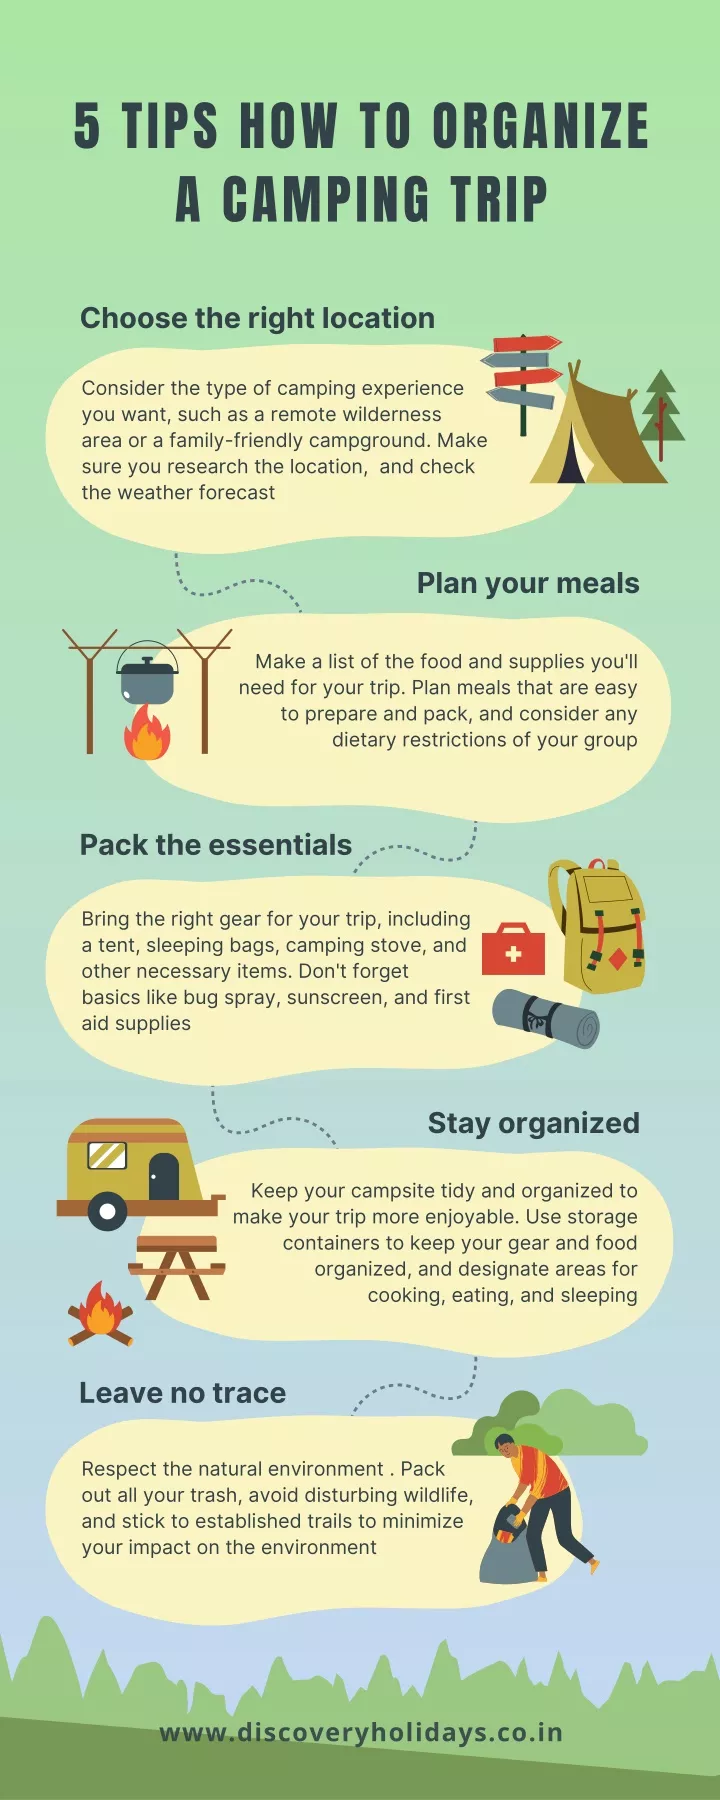 5 tips how to organize a camping trip